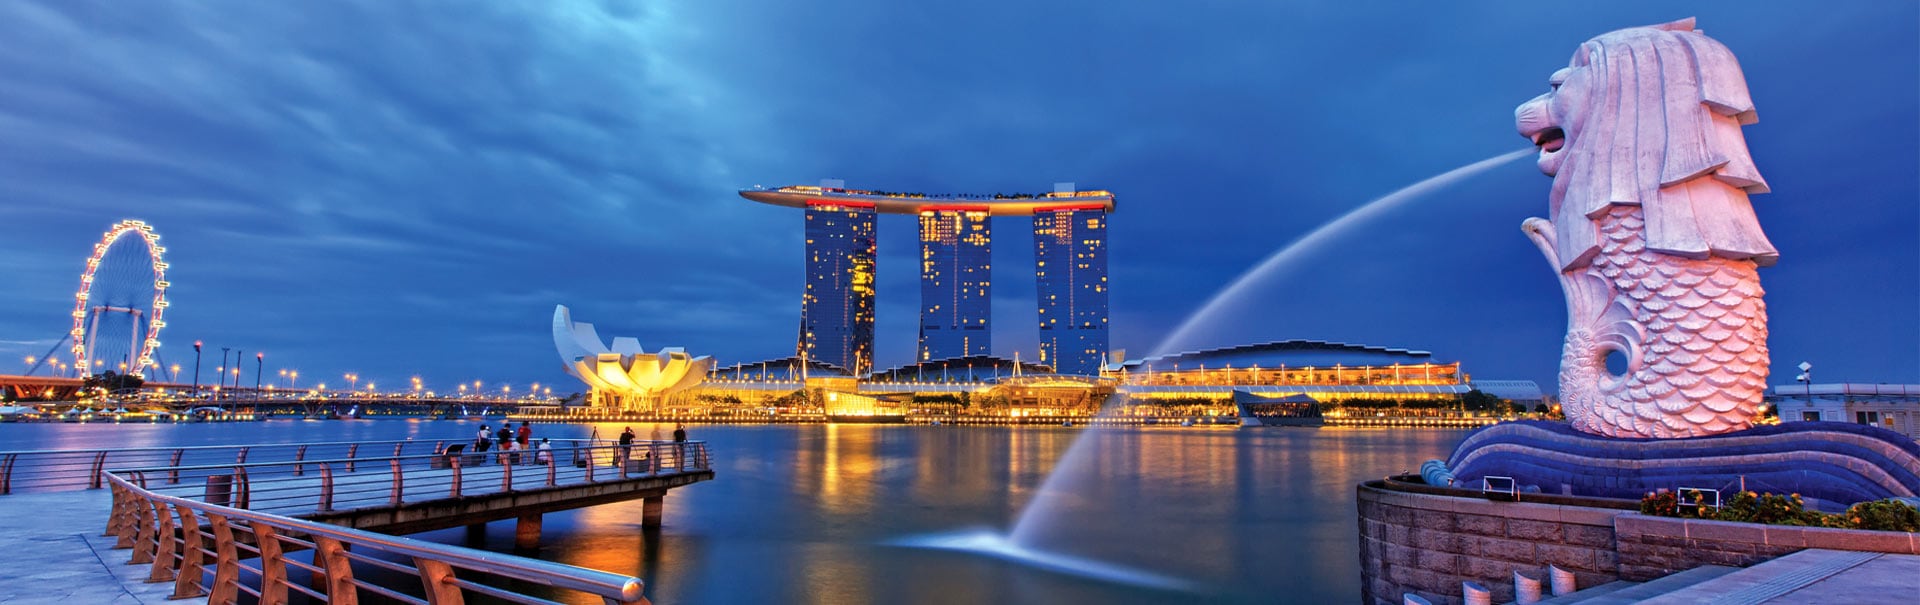 veena world tours packages singapore